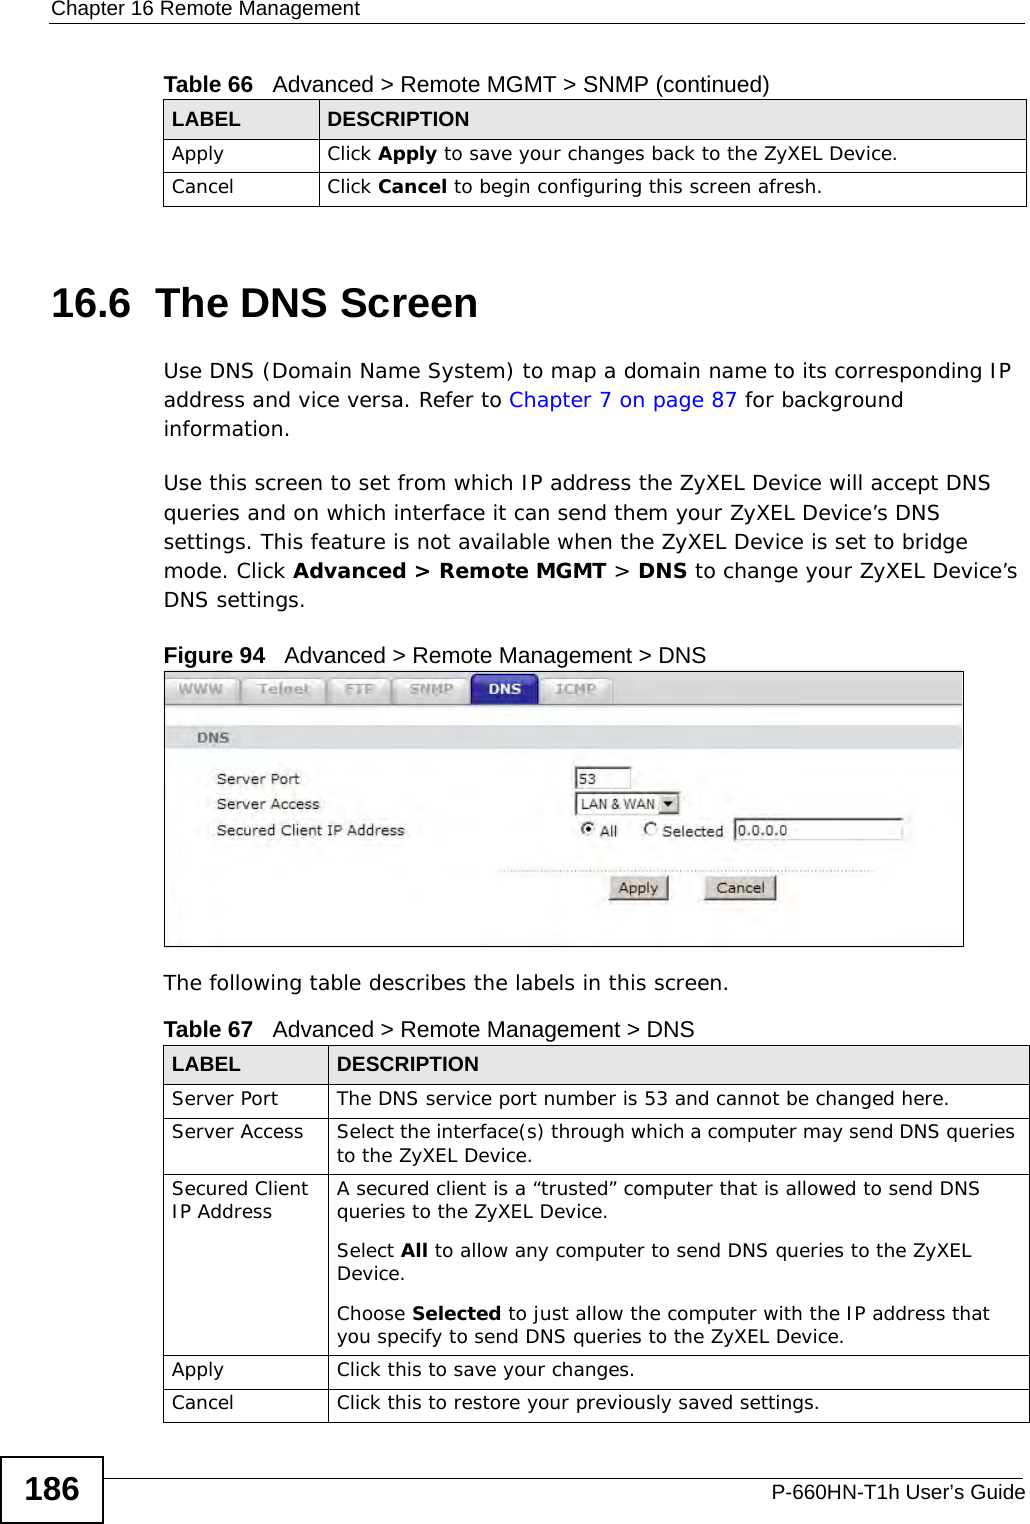 Chapter 16 Remote ManagementP-660HN-T1h User’s Guide18616.6  The DNS Screen Use DNS (Domain Name System) to map a domain name to its corresponding IP address and vice versa. Refer to Chapter 7 on page 87 for background information. Use this screen to set from which IP address the ZyXEL Device will accept DNS queries and on which interface it can send them your ZyXEL Device’s DNS settings. This feature is not available when the ZyXEL Device is set to bridge mode. Click Advanced &gt; Remote MGMT &gt; DNS to change your ZyXEL Device’s DNS settings.Figure 94   Advanced &gt; Remote Management &gt; DNSThe following table describes the labels in this screen.Apply Click Apply to save your changes back to the ZyXEL Device. Cancel Click Cancel to begin configuring this screen afresh.Table 66   Advanced &gt; Remote MGMT &gt; SNMP (continued)LABEL DESCRIPTIONTable 67   Advanced &gt; Remote Management &gt; DNSLABEL DESCRIPTIONServer Port The DNS service port number is 53 and cannot be changed here.Server Access  Select the interface(s) through which a computer may send DNS queries to the ZyXEL Device.Secured Client IP Address A secured client is a “trusted” computer that is allowed to send DNS queries to the ZyXEL Device.Select All to allow any computer to send DNS queries to the ZyXEL Device.Choose Selected to just allow the computer with the IP address that you specify to send DNS queries to the ZyXEL Device.Apply Click this to save your changes.Cancel Click this to restore your previously saved settings.